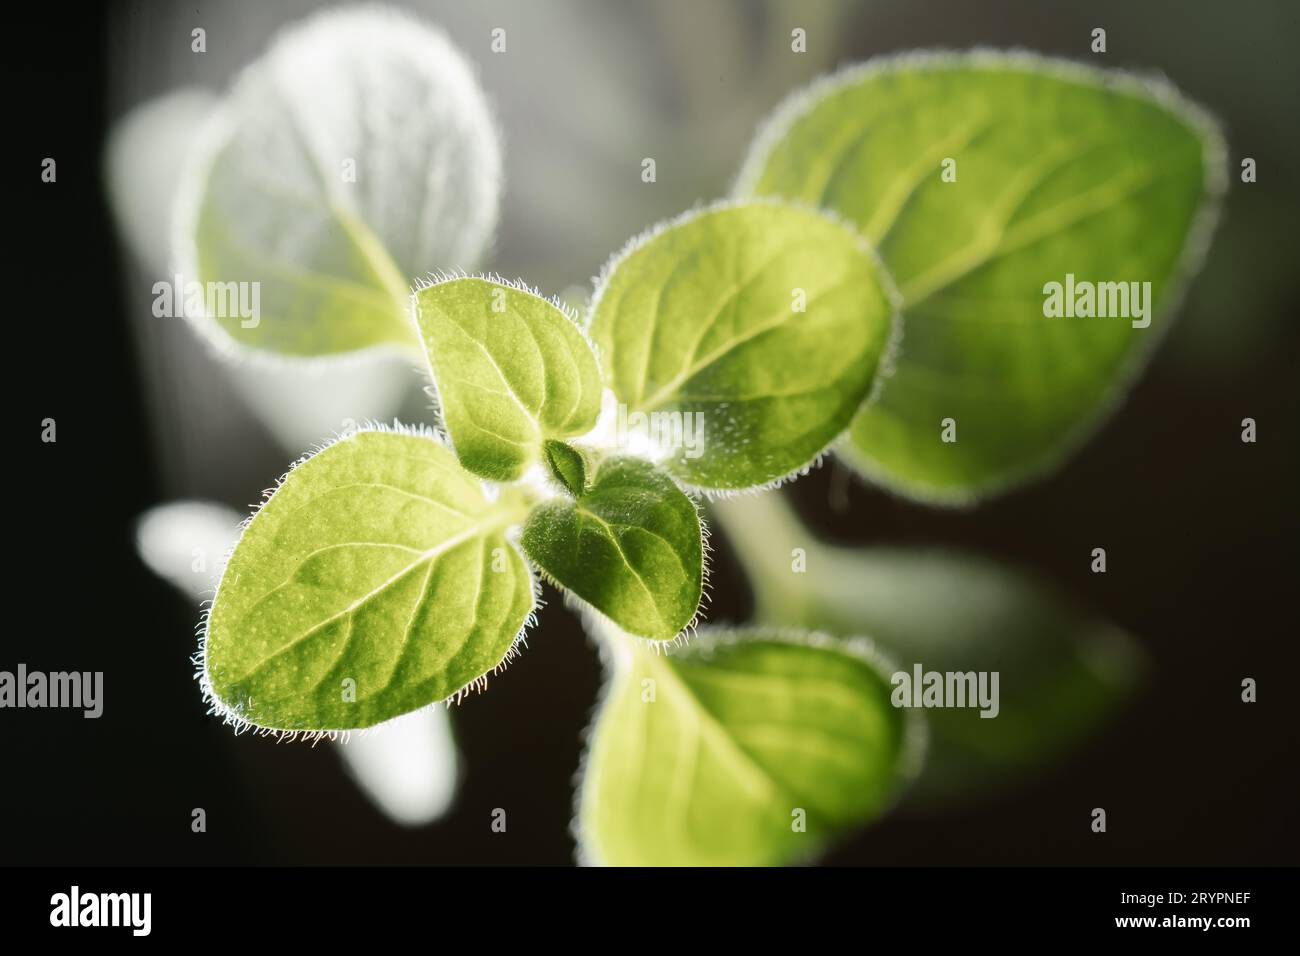 Macro photography of plant leaves on a dark background. Stock Photo